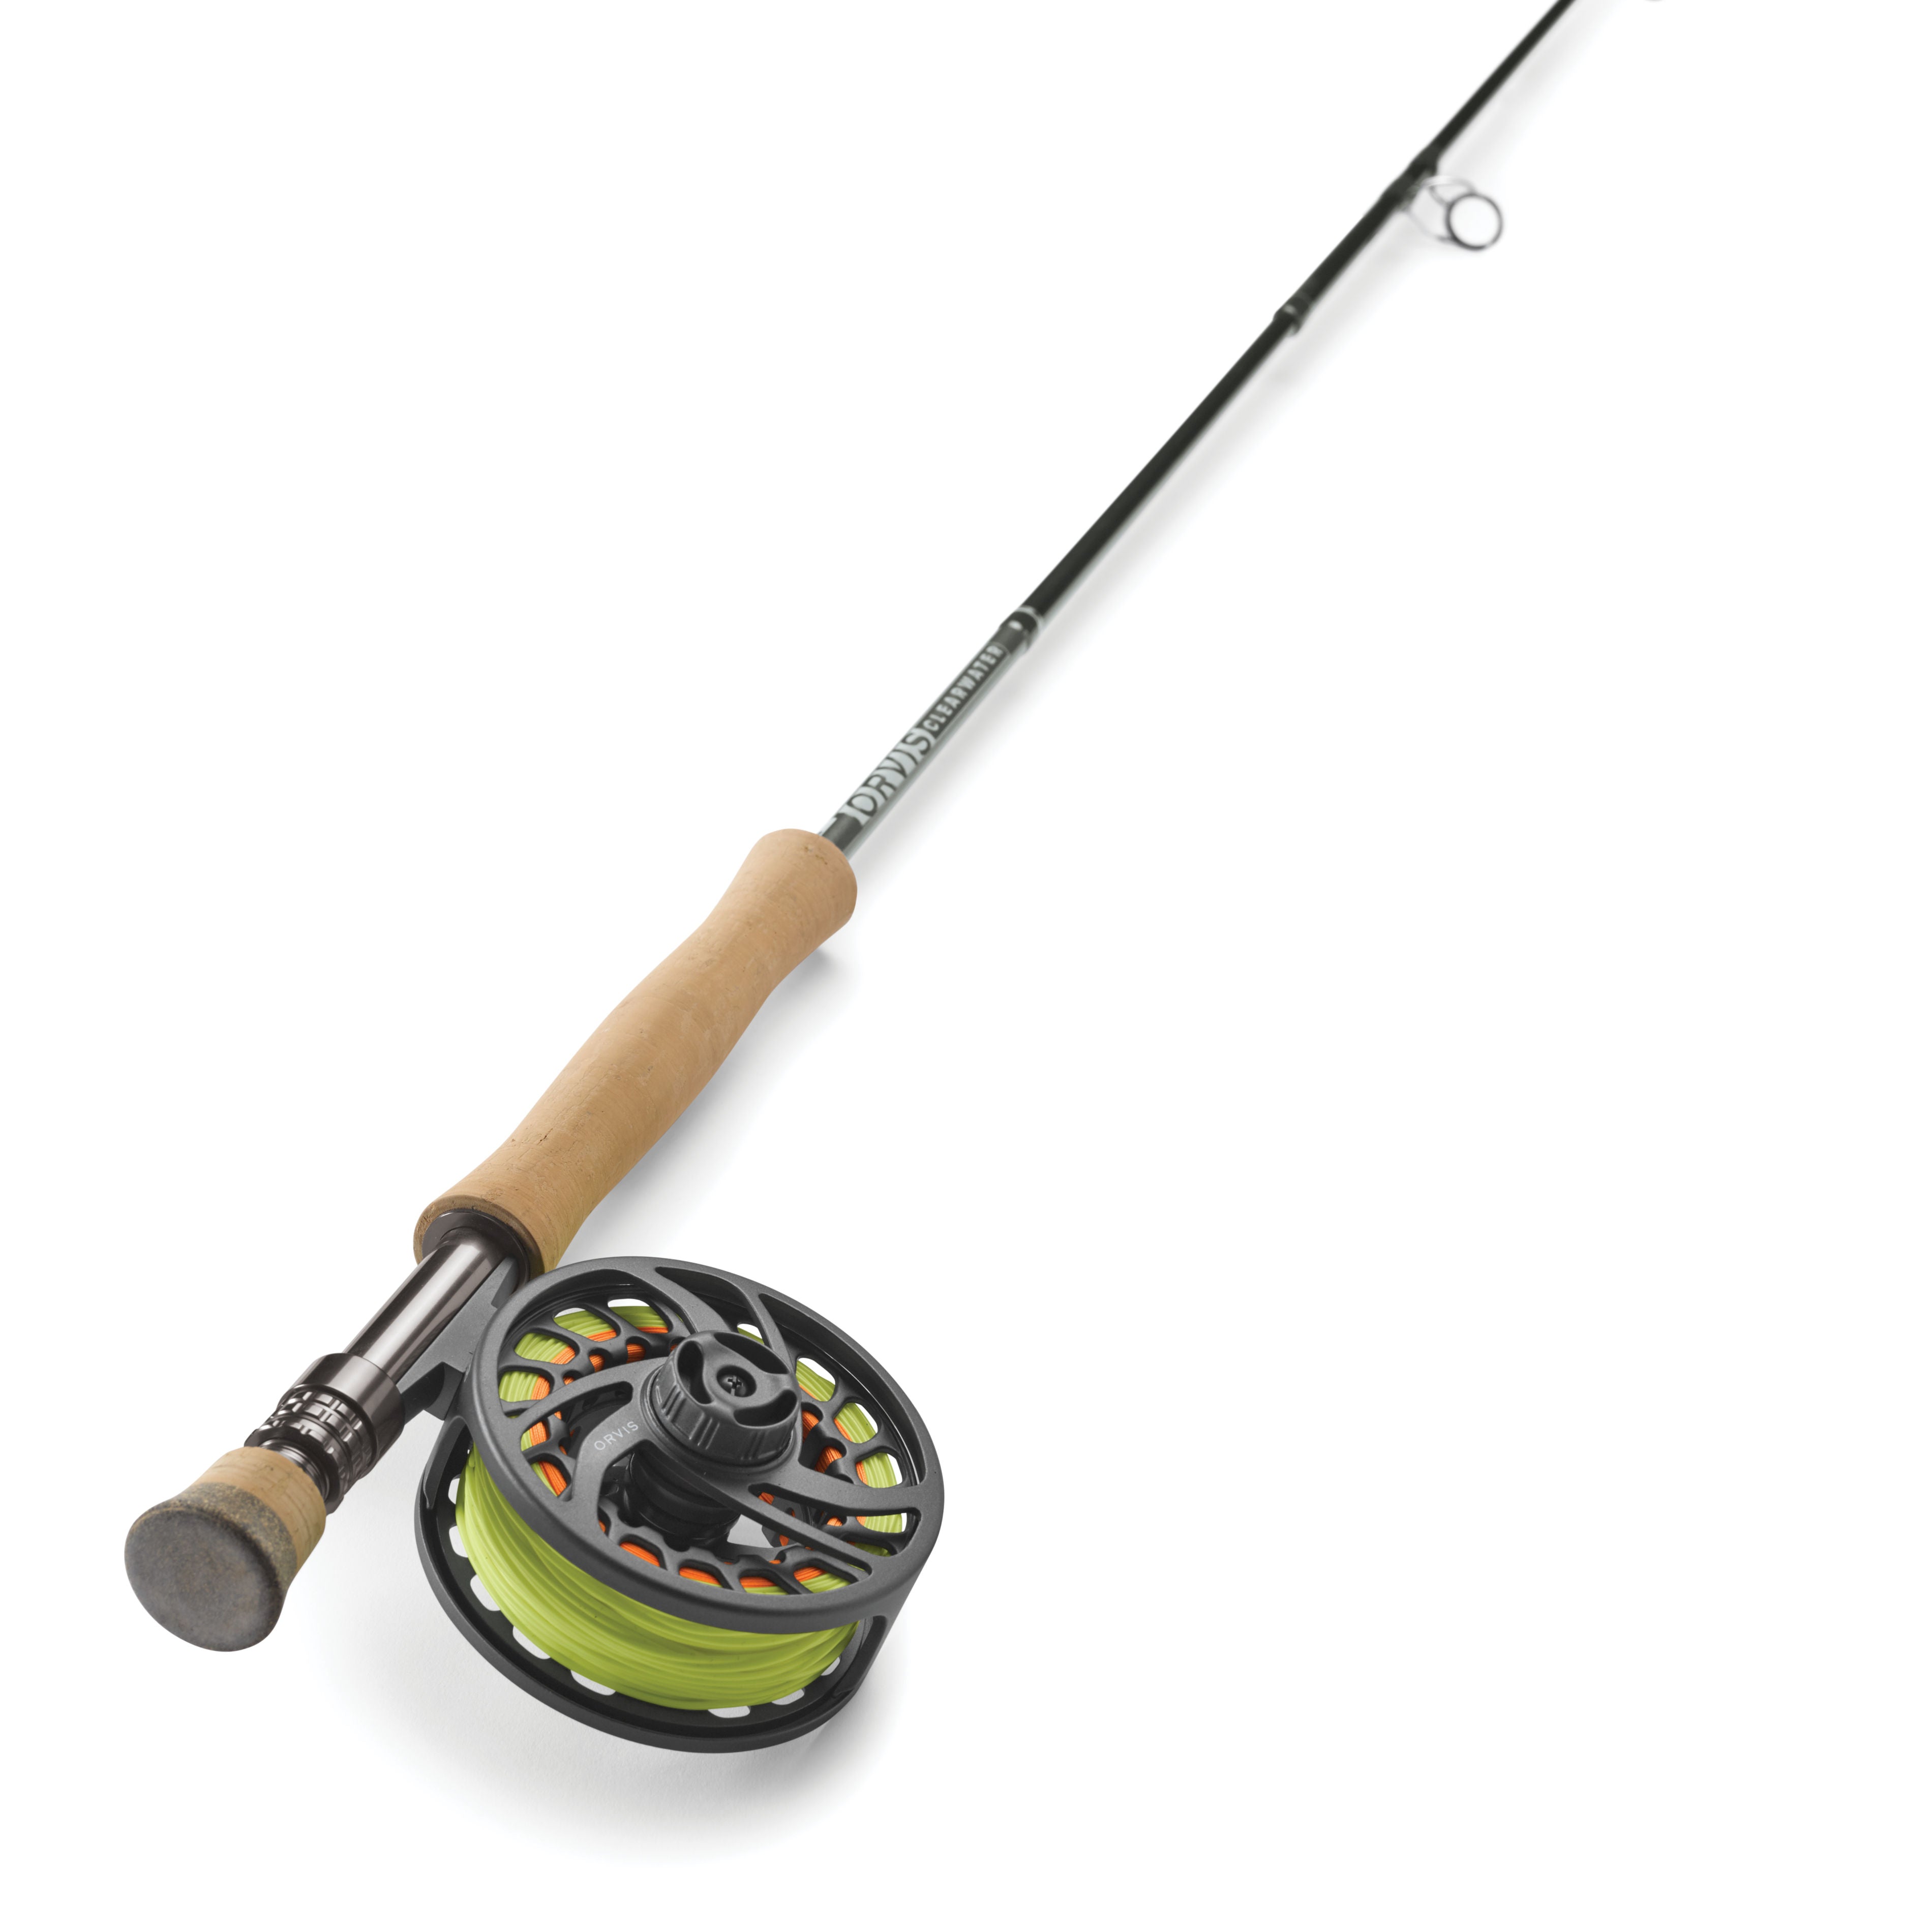 Orvis Clearwater Fly Fishing Outfit, 3ASS5351, 9ft 0in, 8 Line